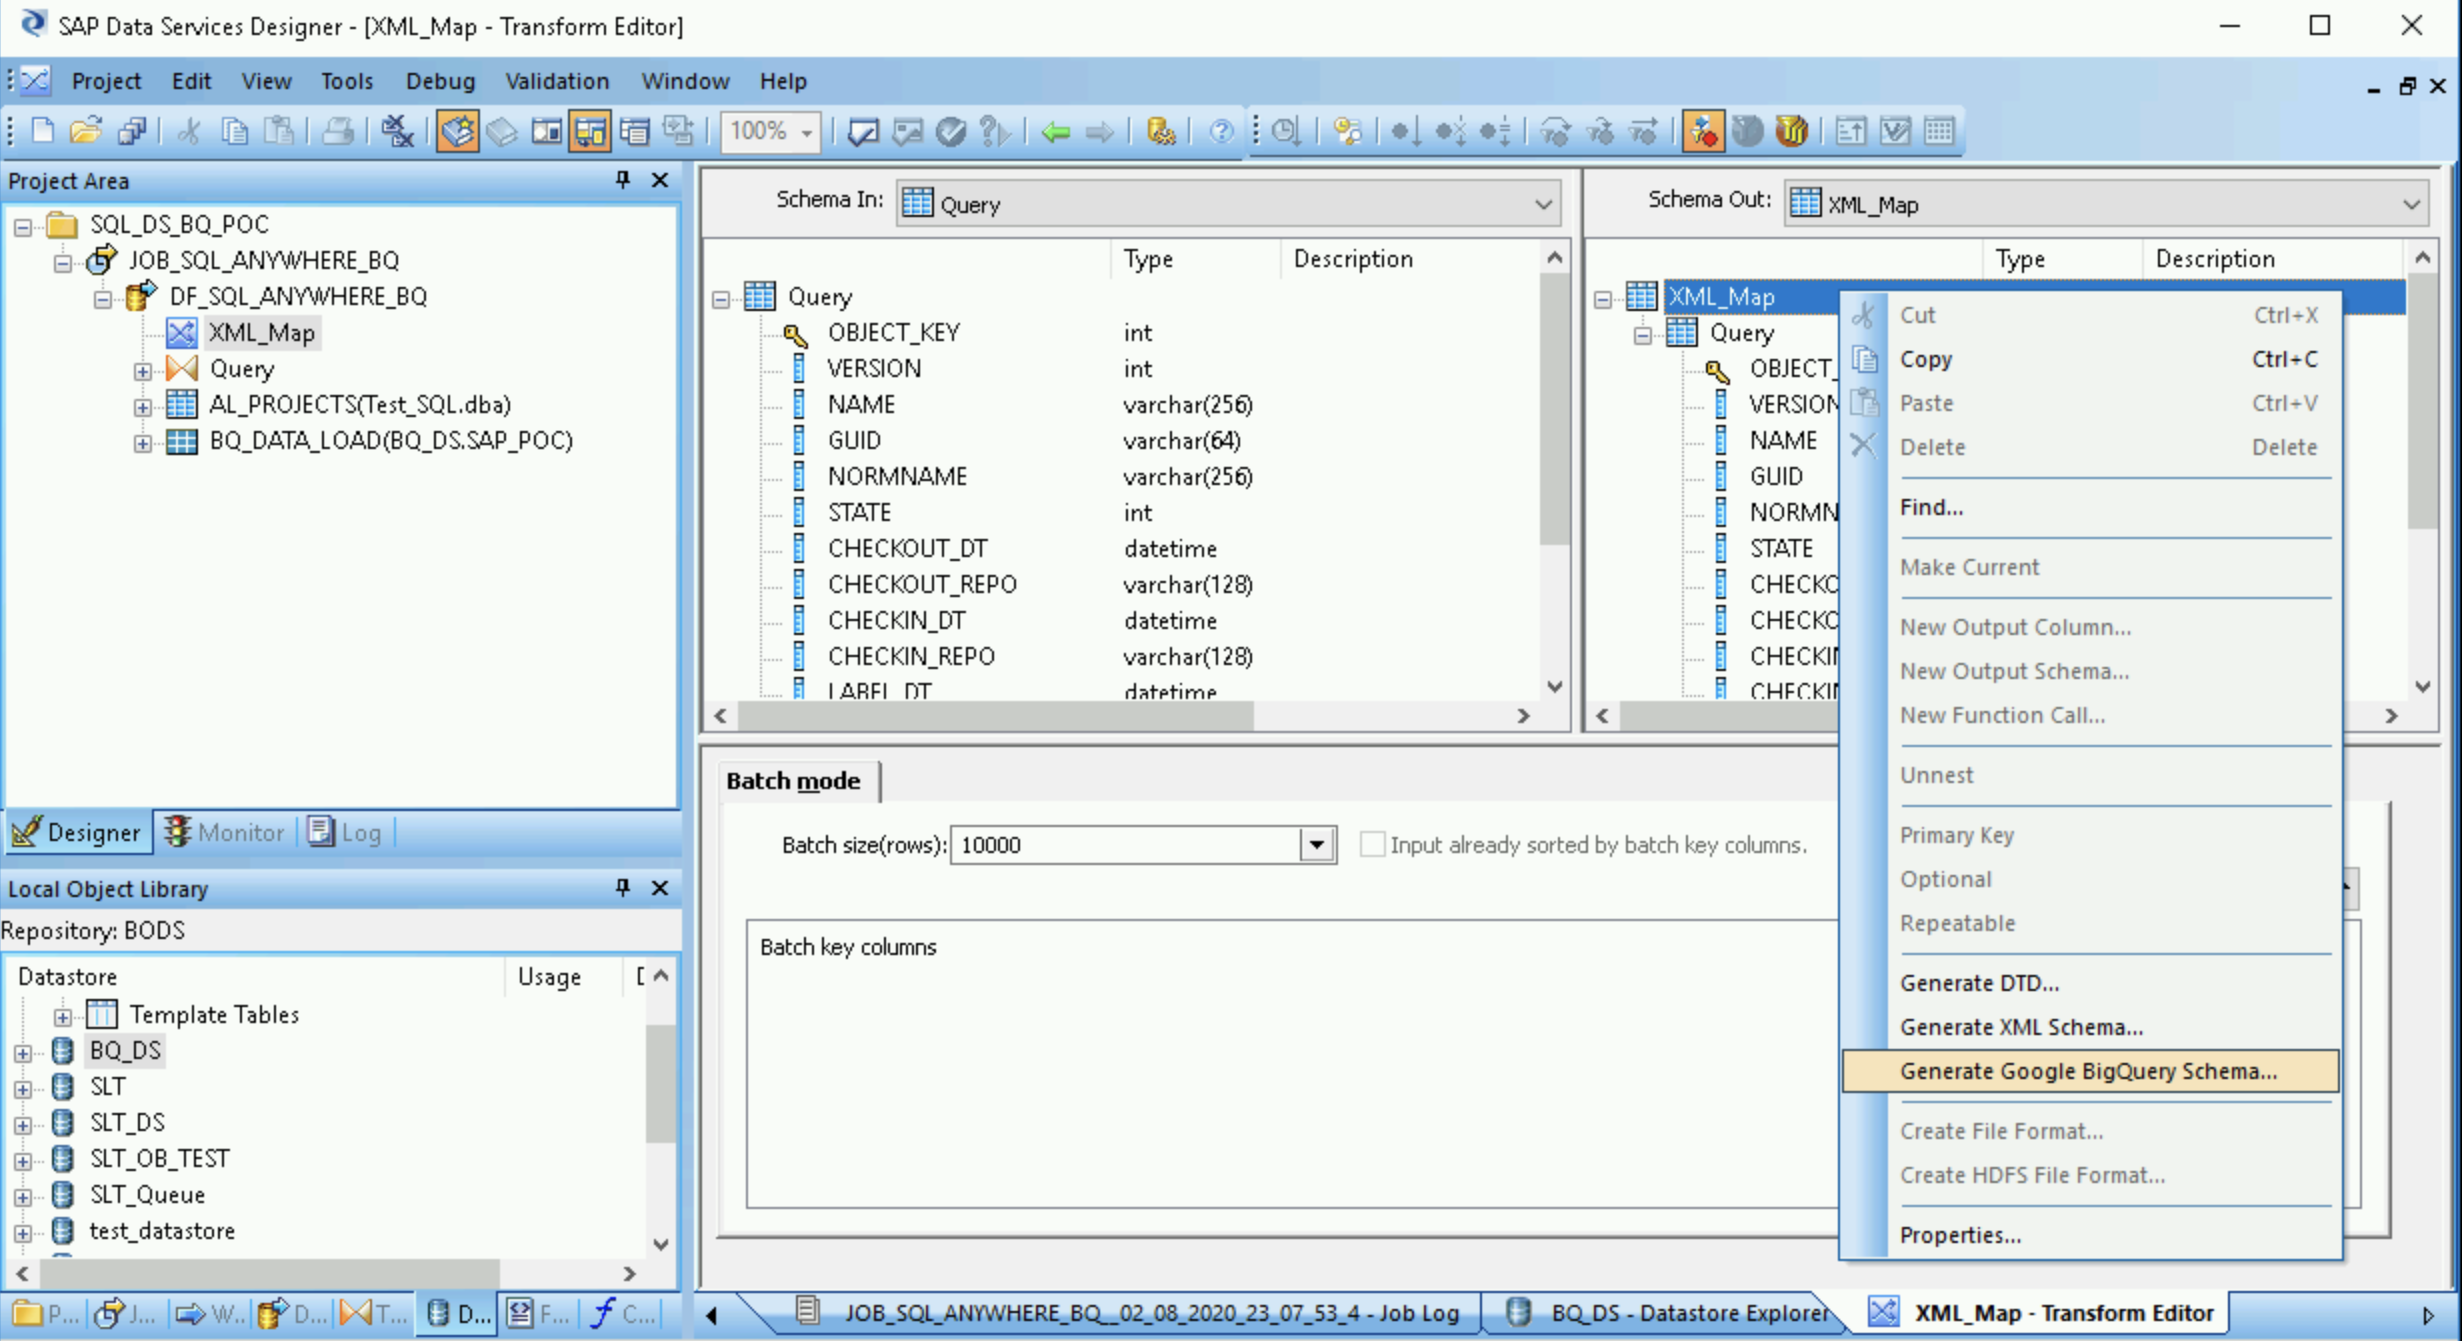 A screen capture of the SAP Data Services Designer showing the drop-down menu
to generate a Google BigQuery schema.